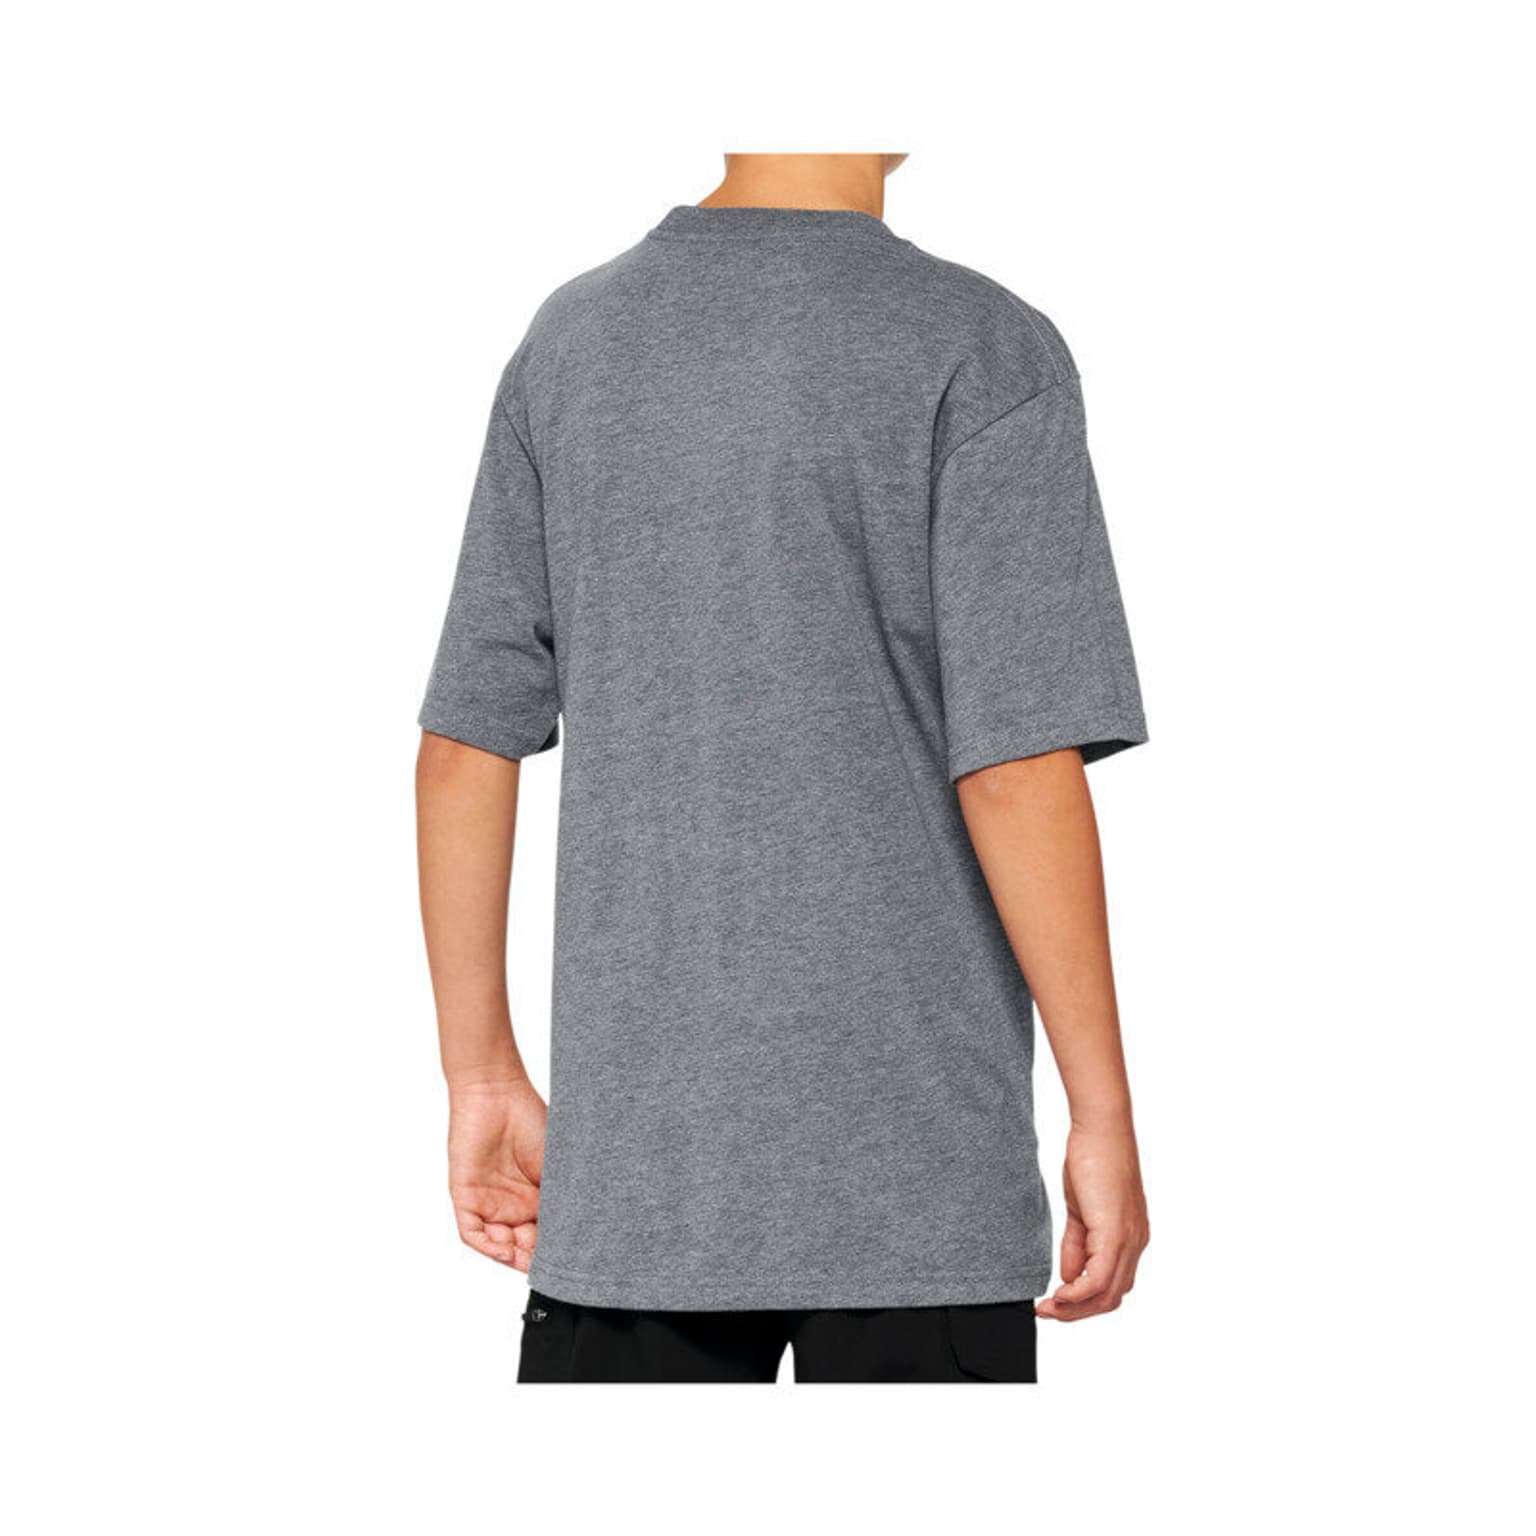 100% 100% Manifesto Youth T-Shirt gris-claire 2